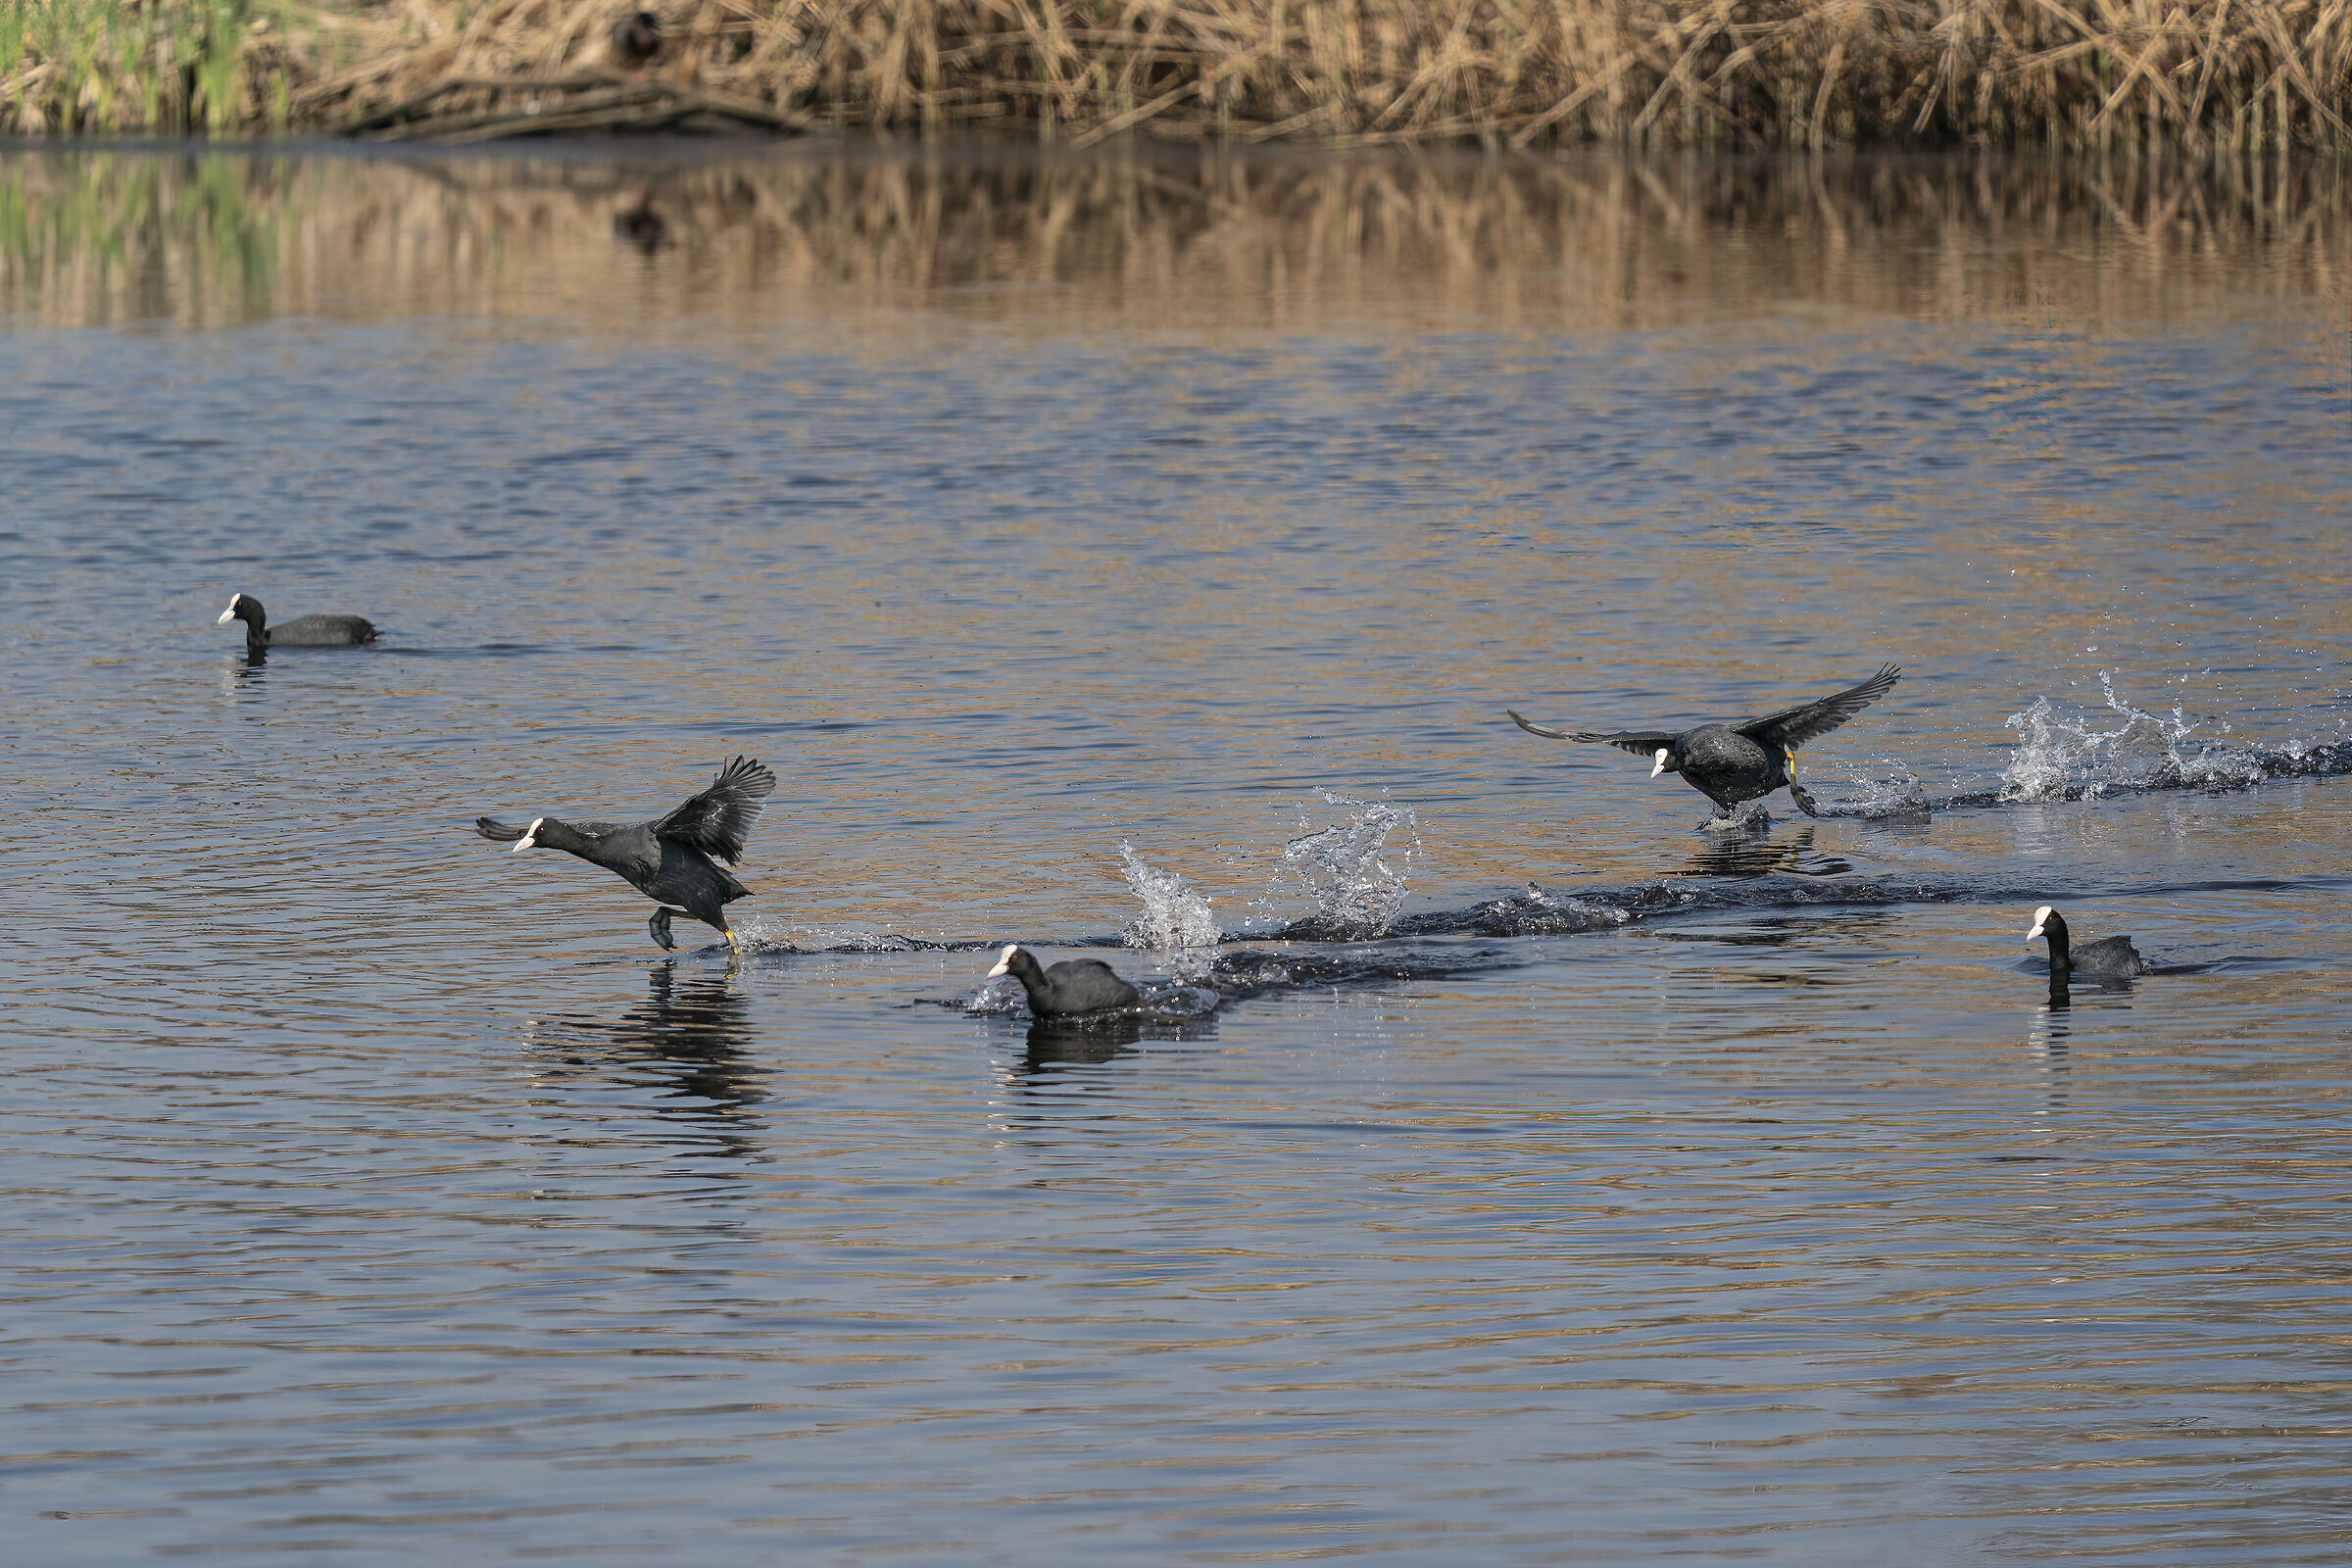 Coots - chases and disputes between competitors...